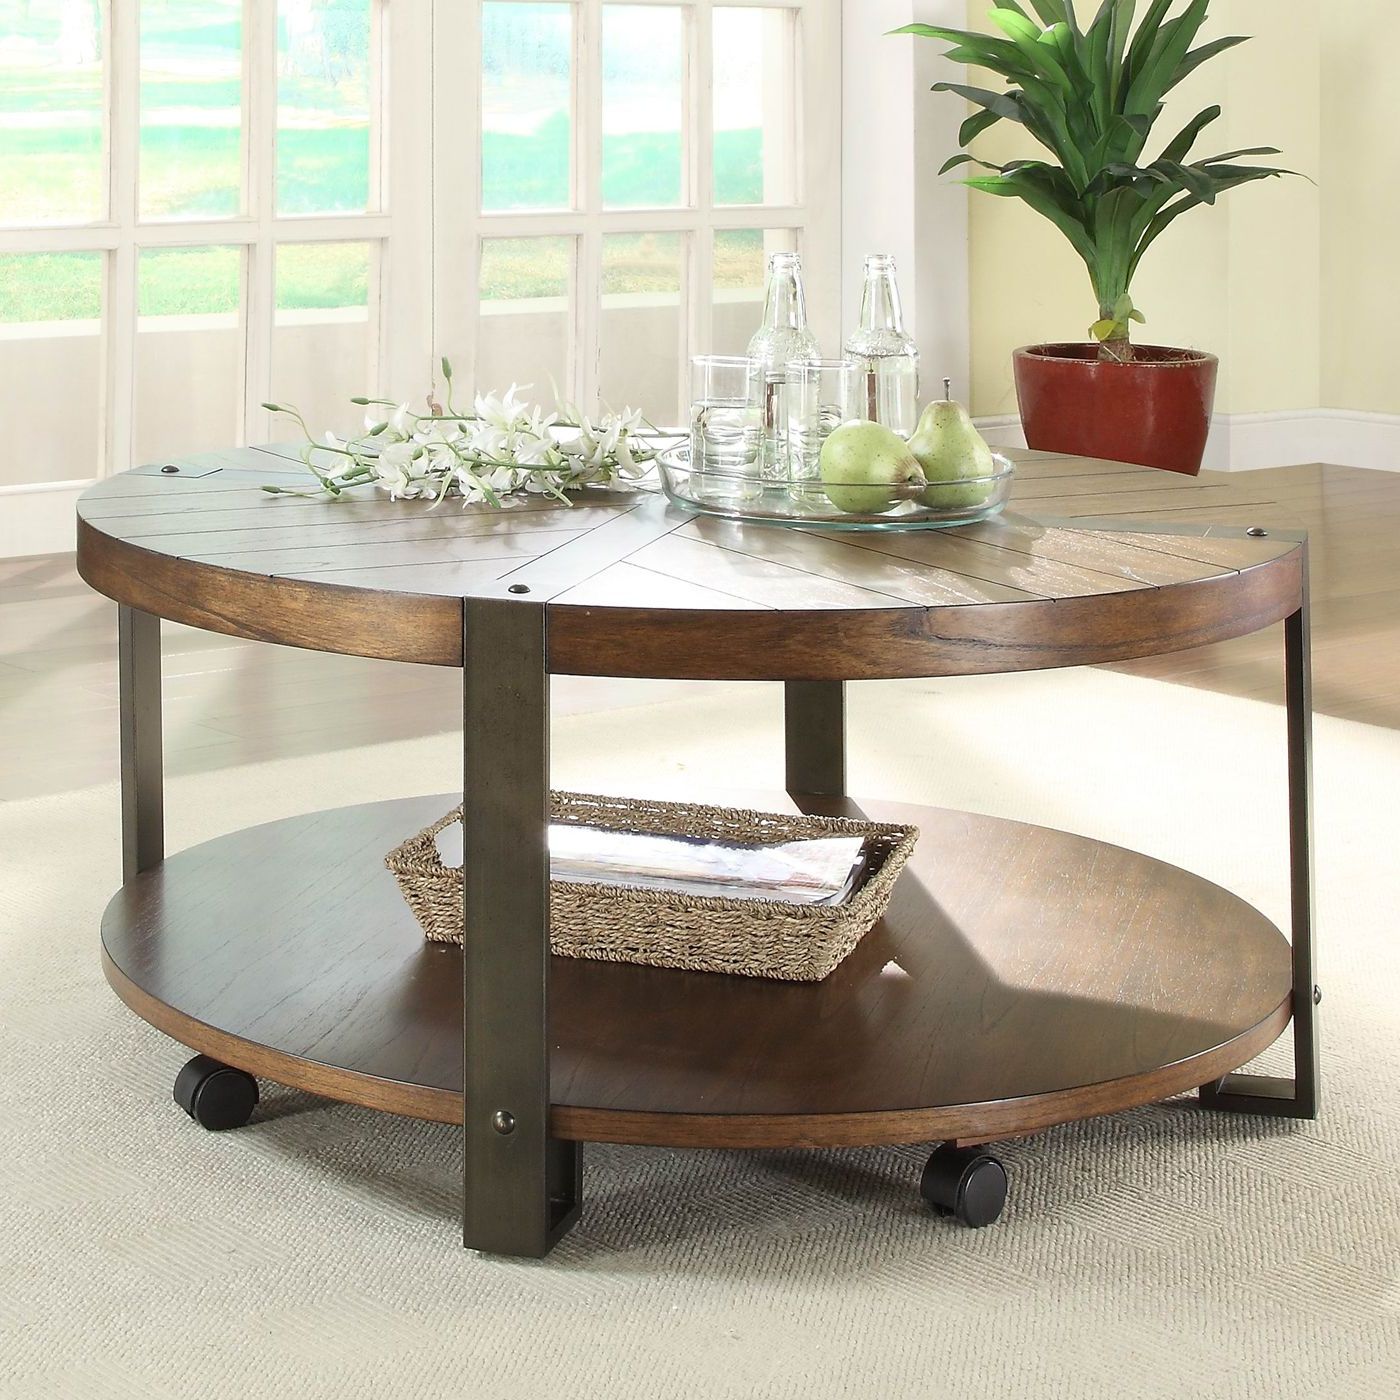 Homelegance 3438 01 Northwood Round Cocktail Table On Casters | Coffee For Coffee Tables With Casters (Gallery 11 of 20)